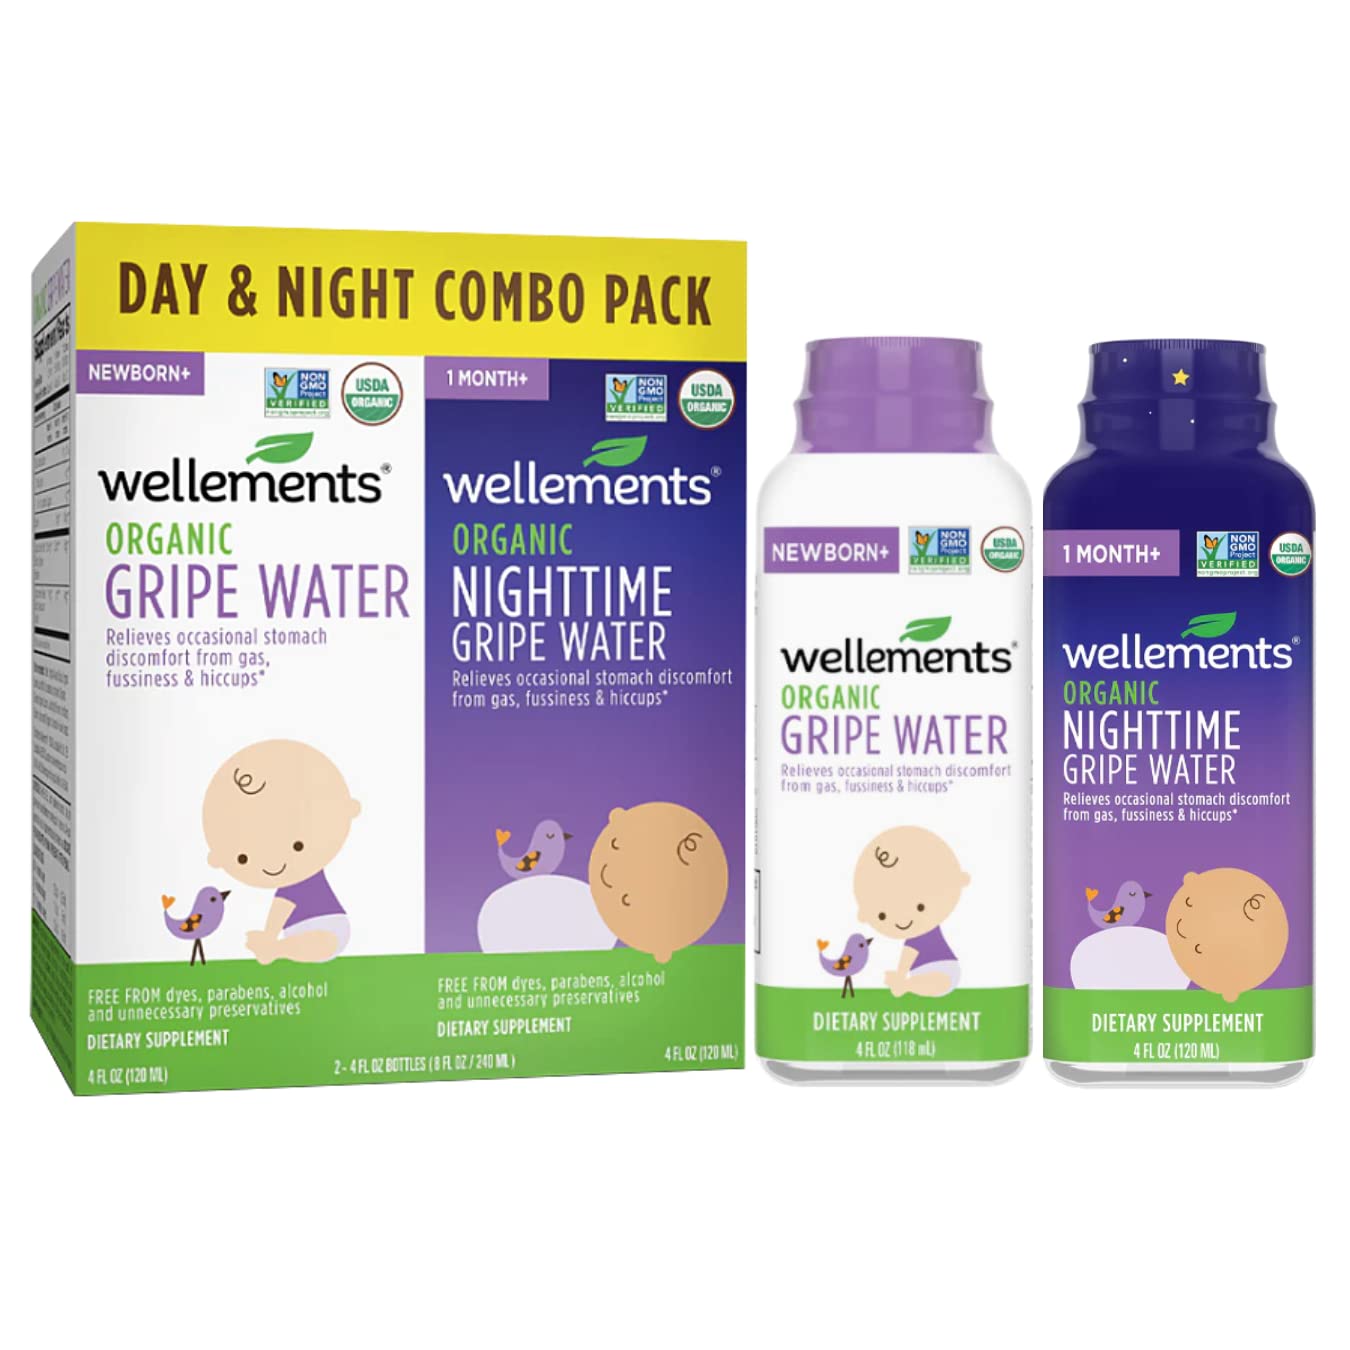 Gripe Water for Babies — What Is It and Is It Safe for Newborns?